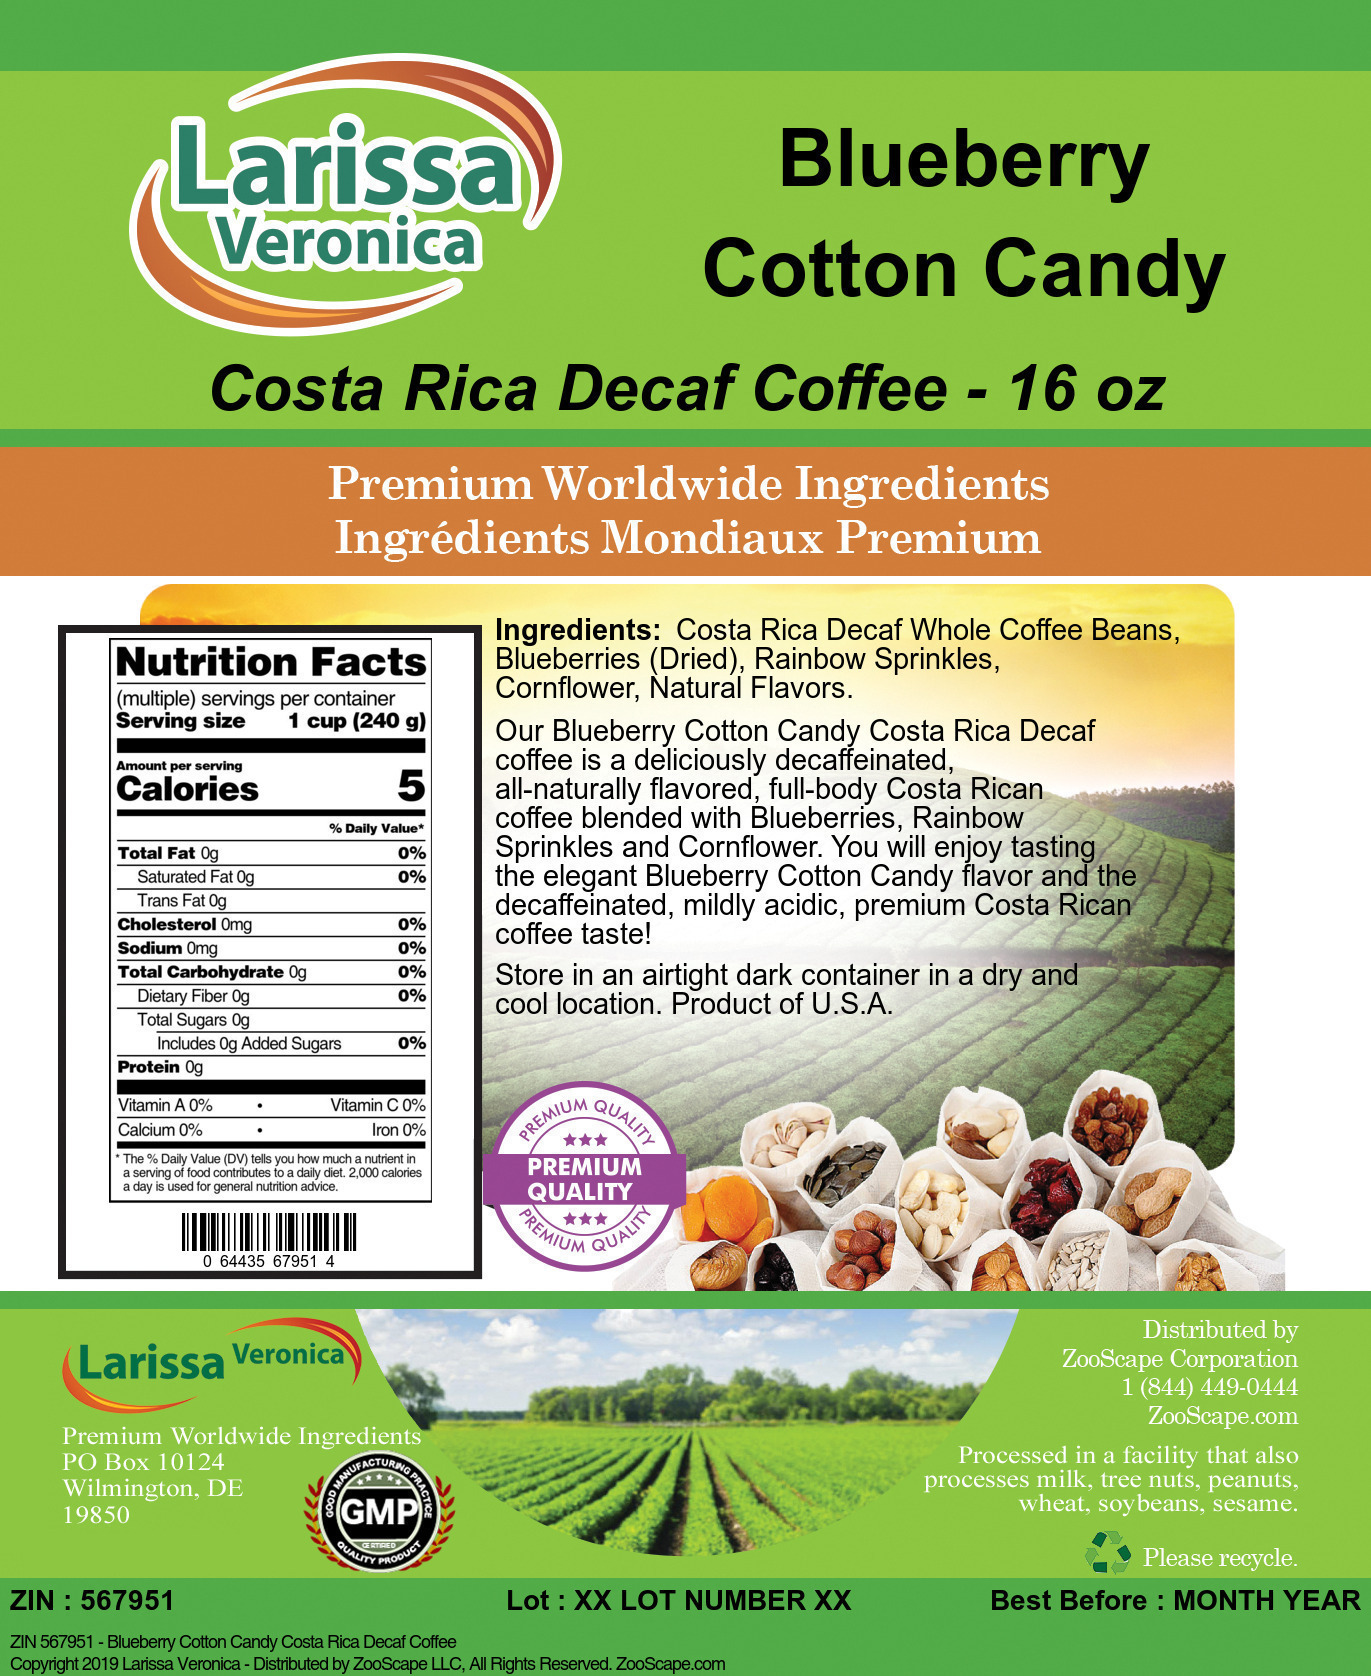 Blueberry Cotton Candy Costa Rica Decaf Coffee - Label